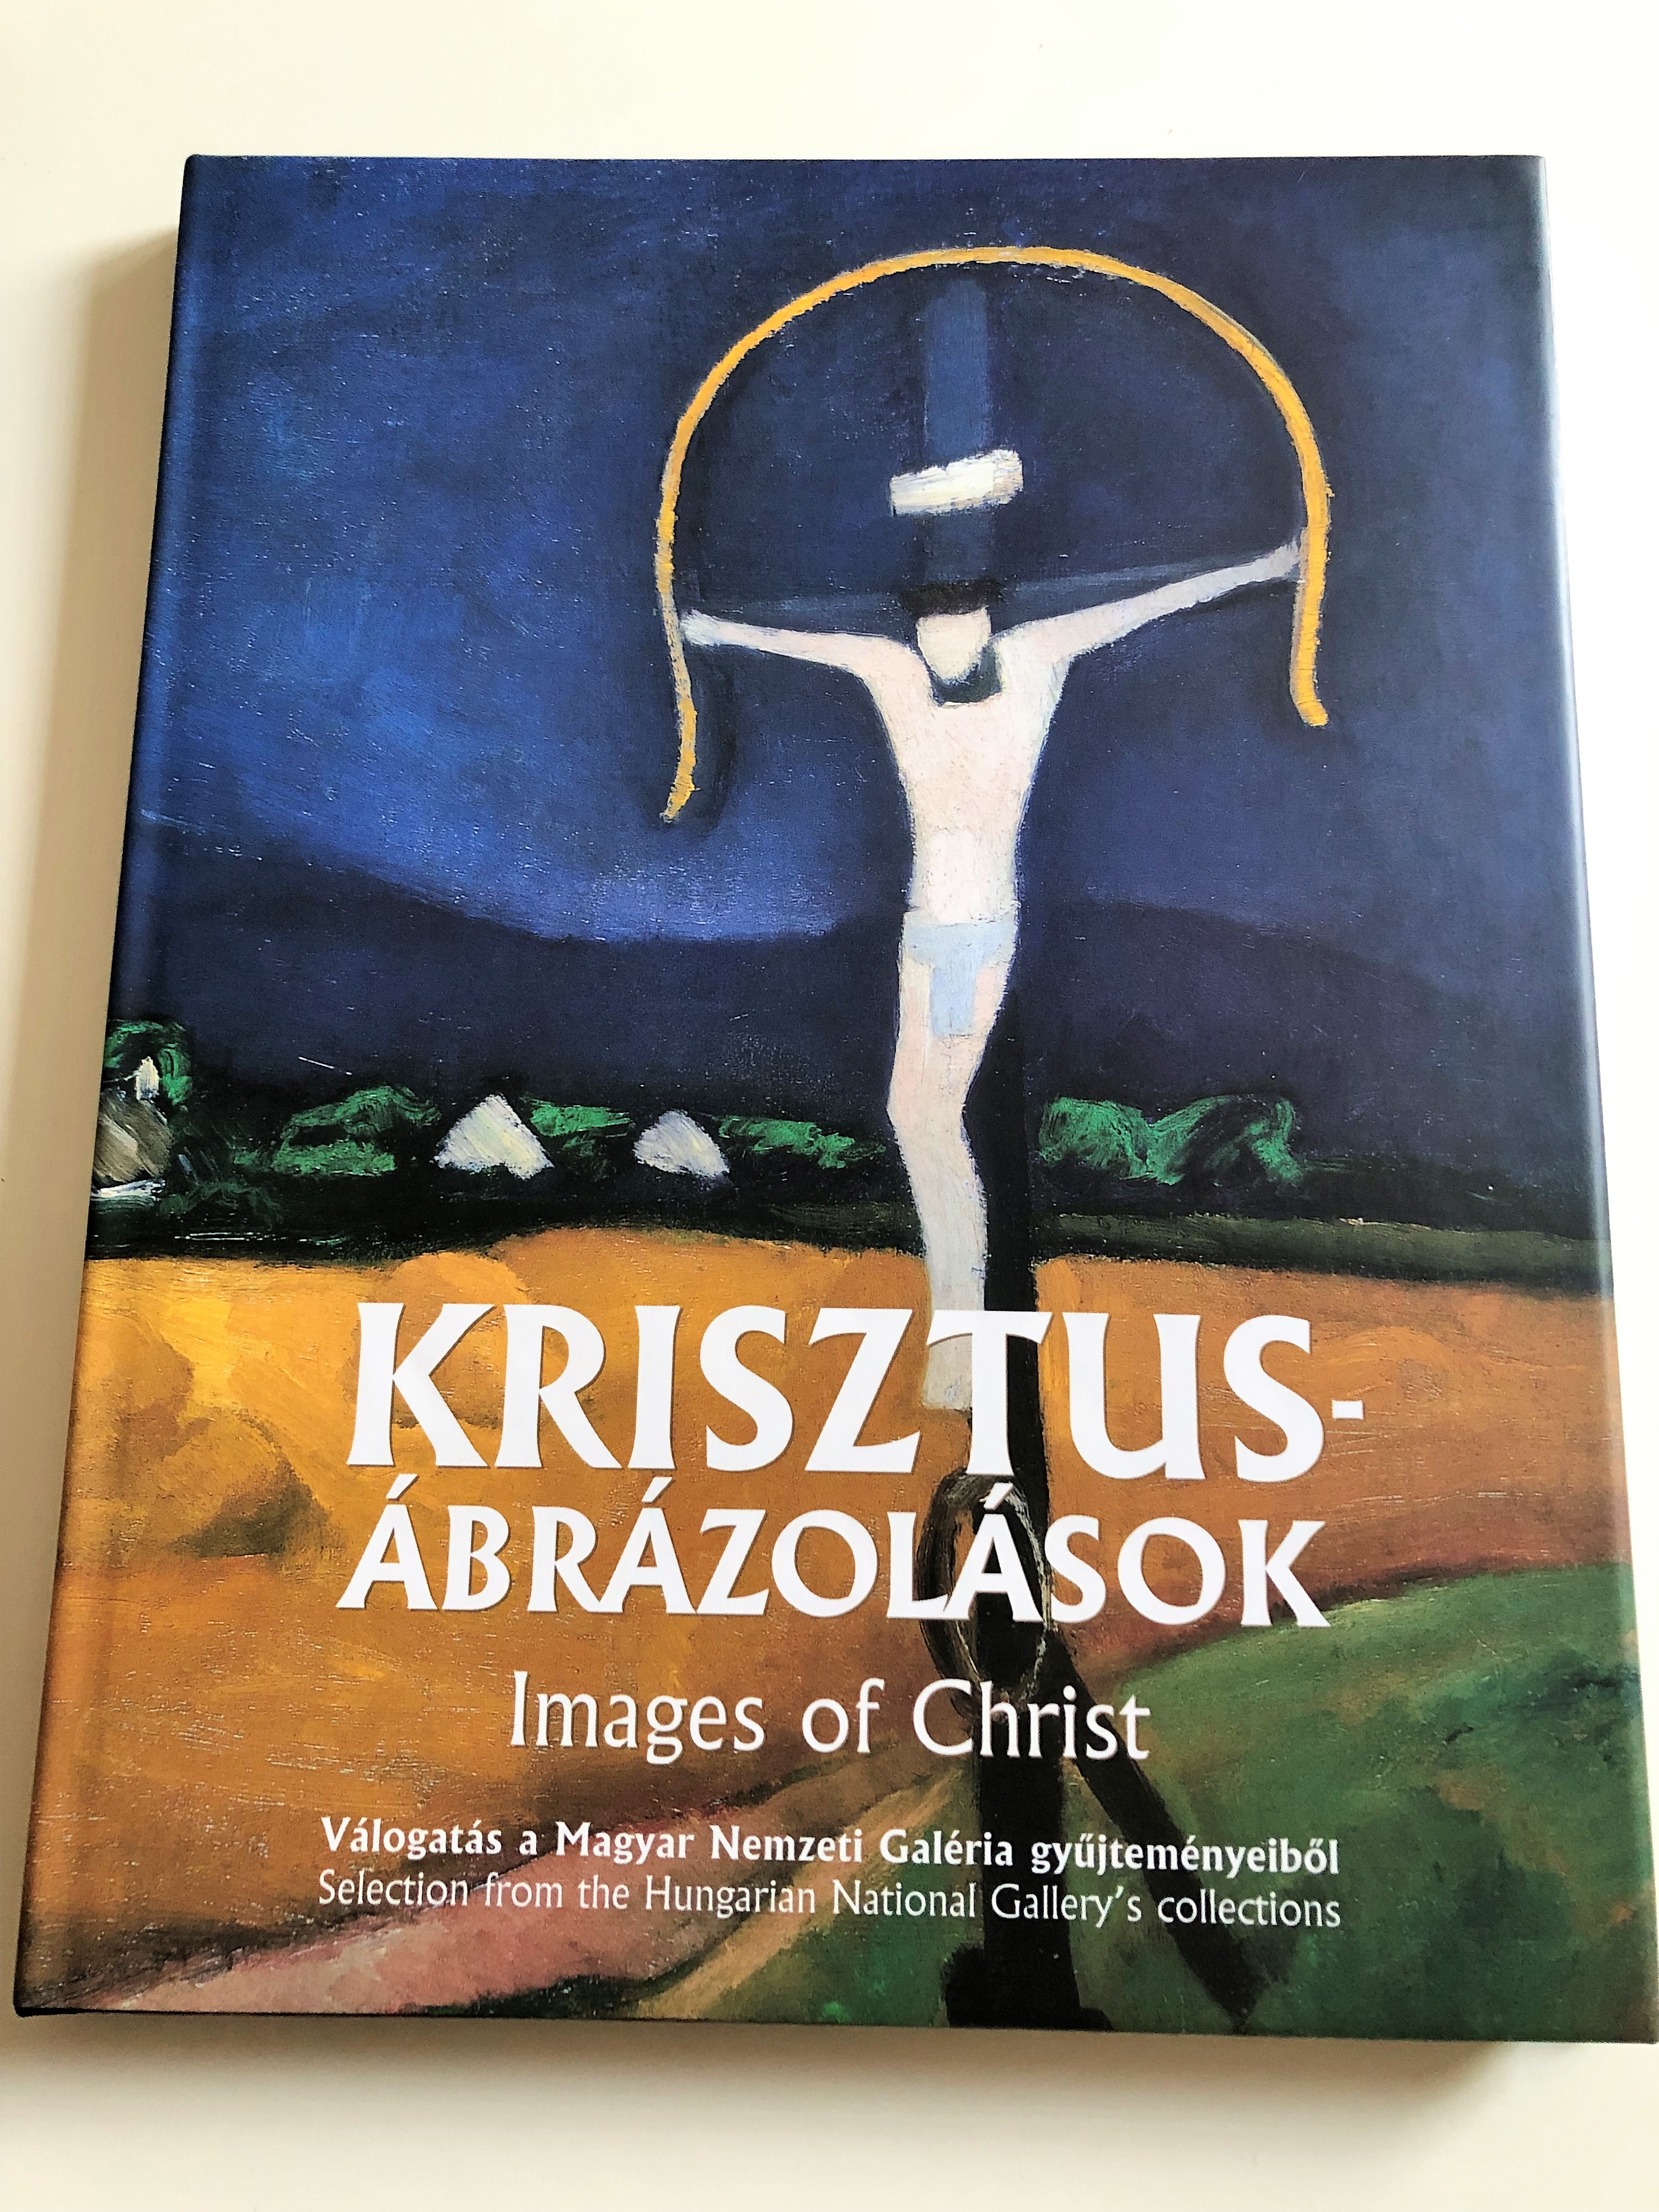 krisztus-br-zol-sok-images-of-christ-v-logat-s-a-magyar-nemzeti-gal-ria-gy-jtem-nyeib-l-selection-from-the-hungarian-national-gallery-s-collections-hardcover-2004-1-.jpg